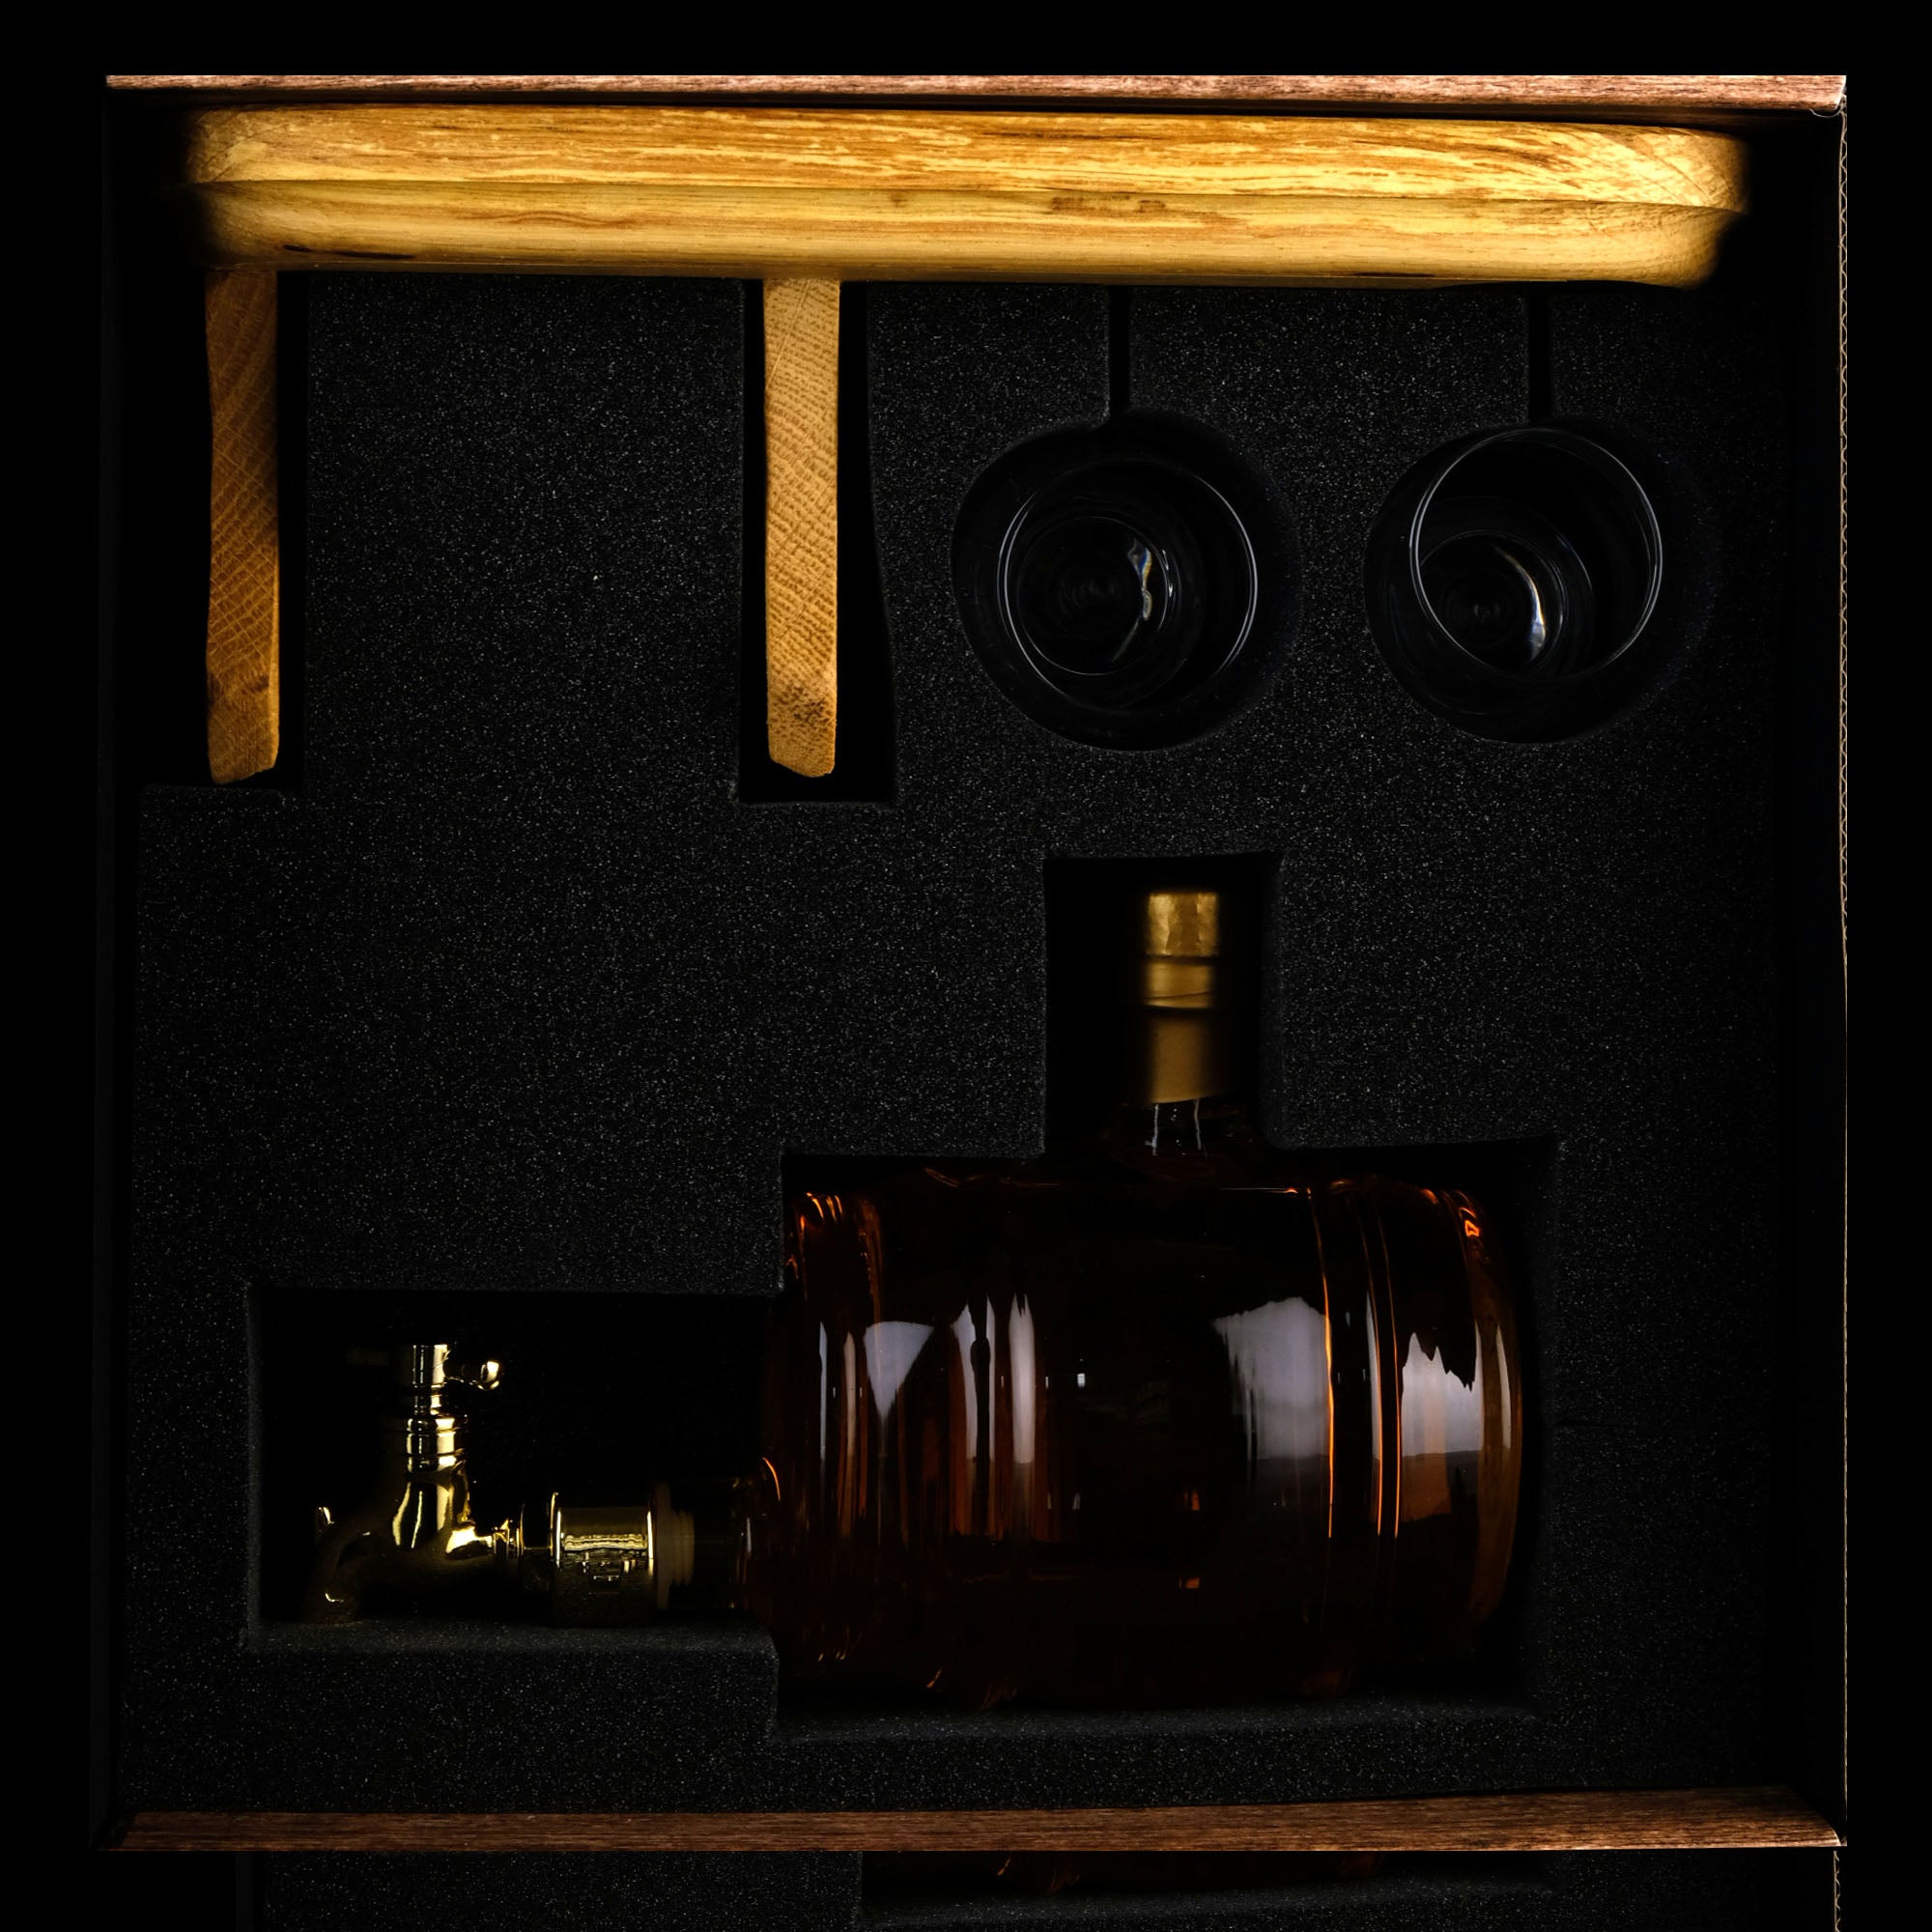 Whisky Barrel Decanter + Tap With Two Nosing Glasses